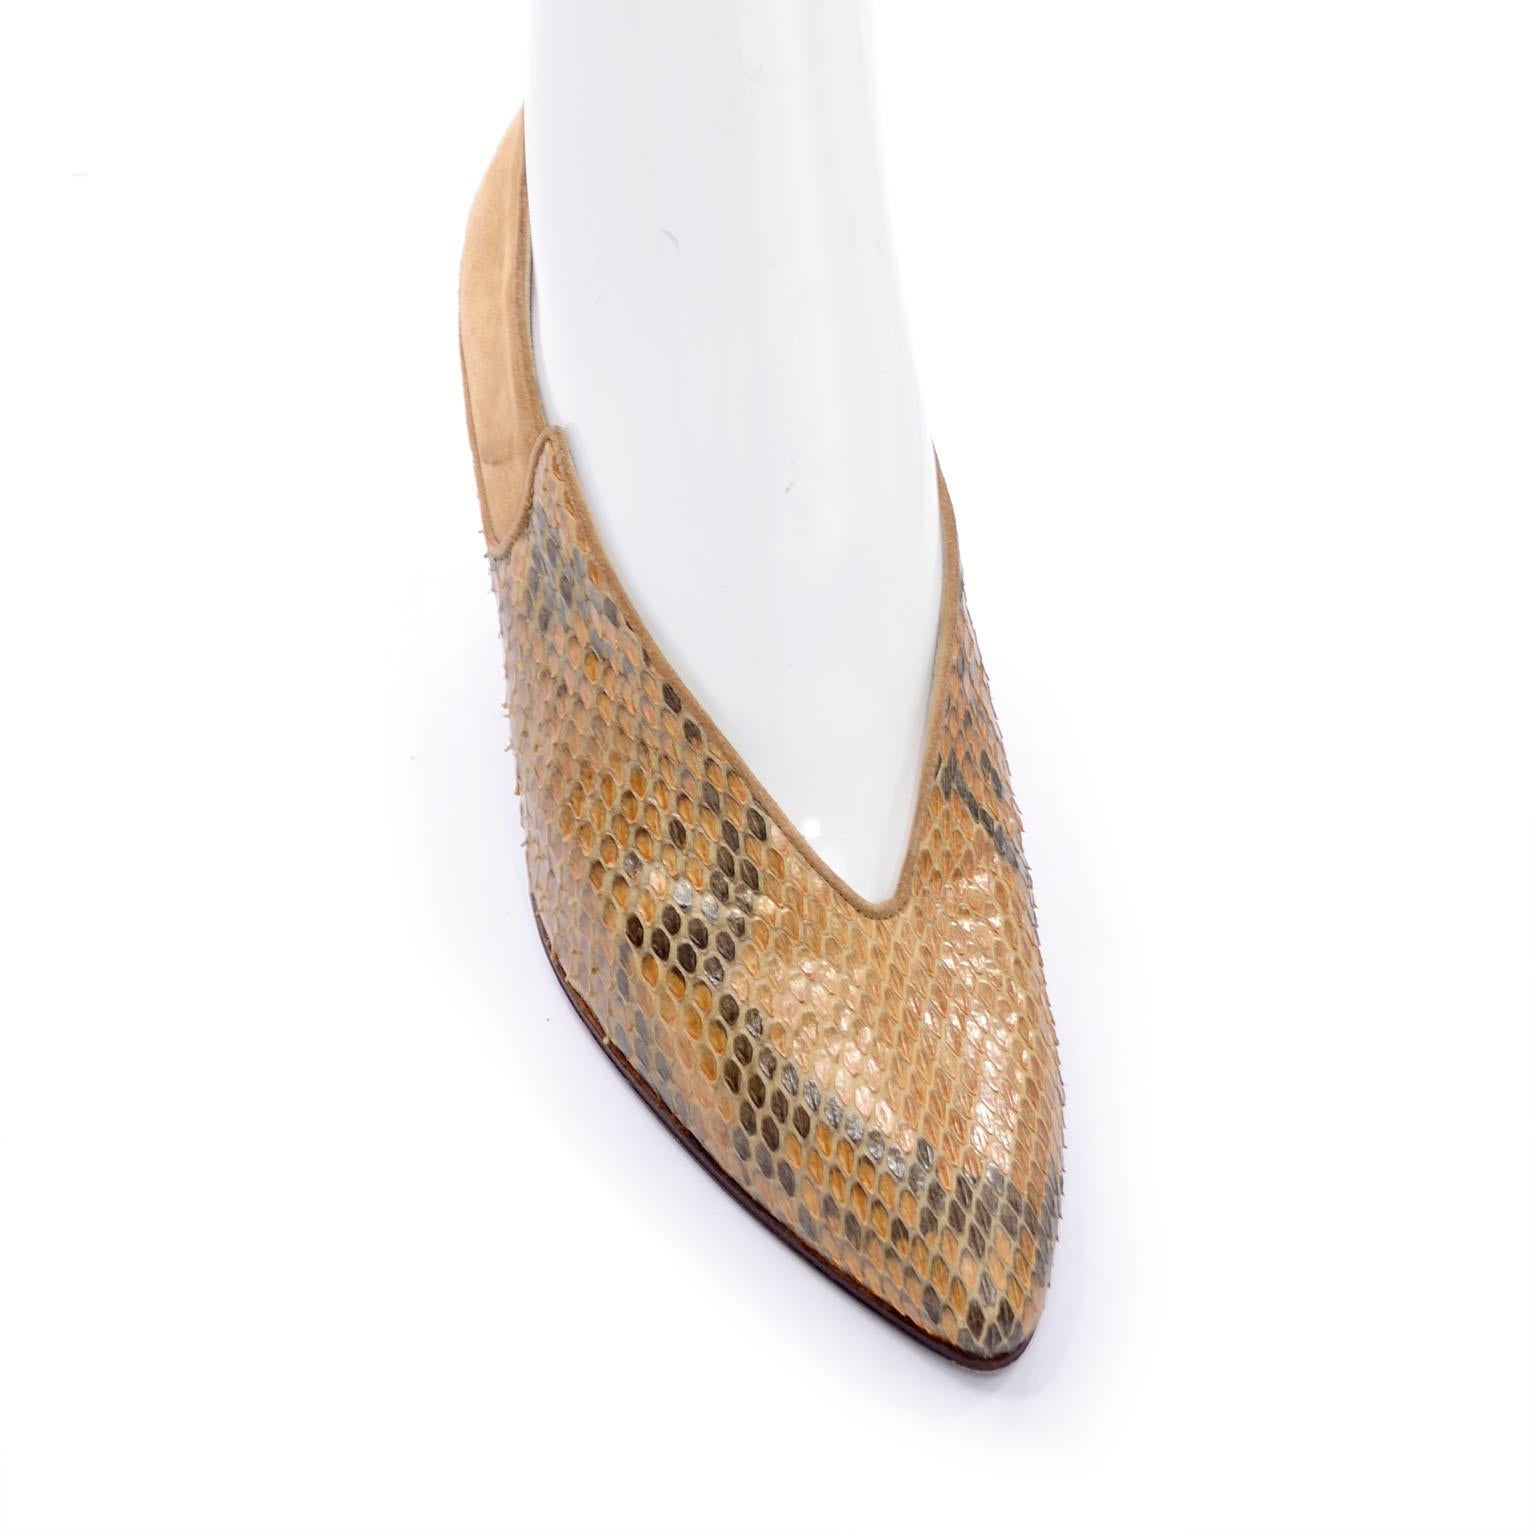 These Maud Frizon tan brown and tan snakeskin shoes are very rare and incredibly unique!  The suede  heel is a thin block heel that is set at an angle. These vintage shoes have a very pointed toe and the opening aligns with this point. Made in Italy